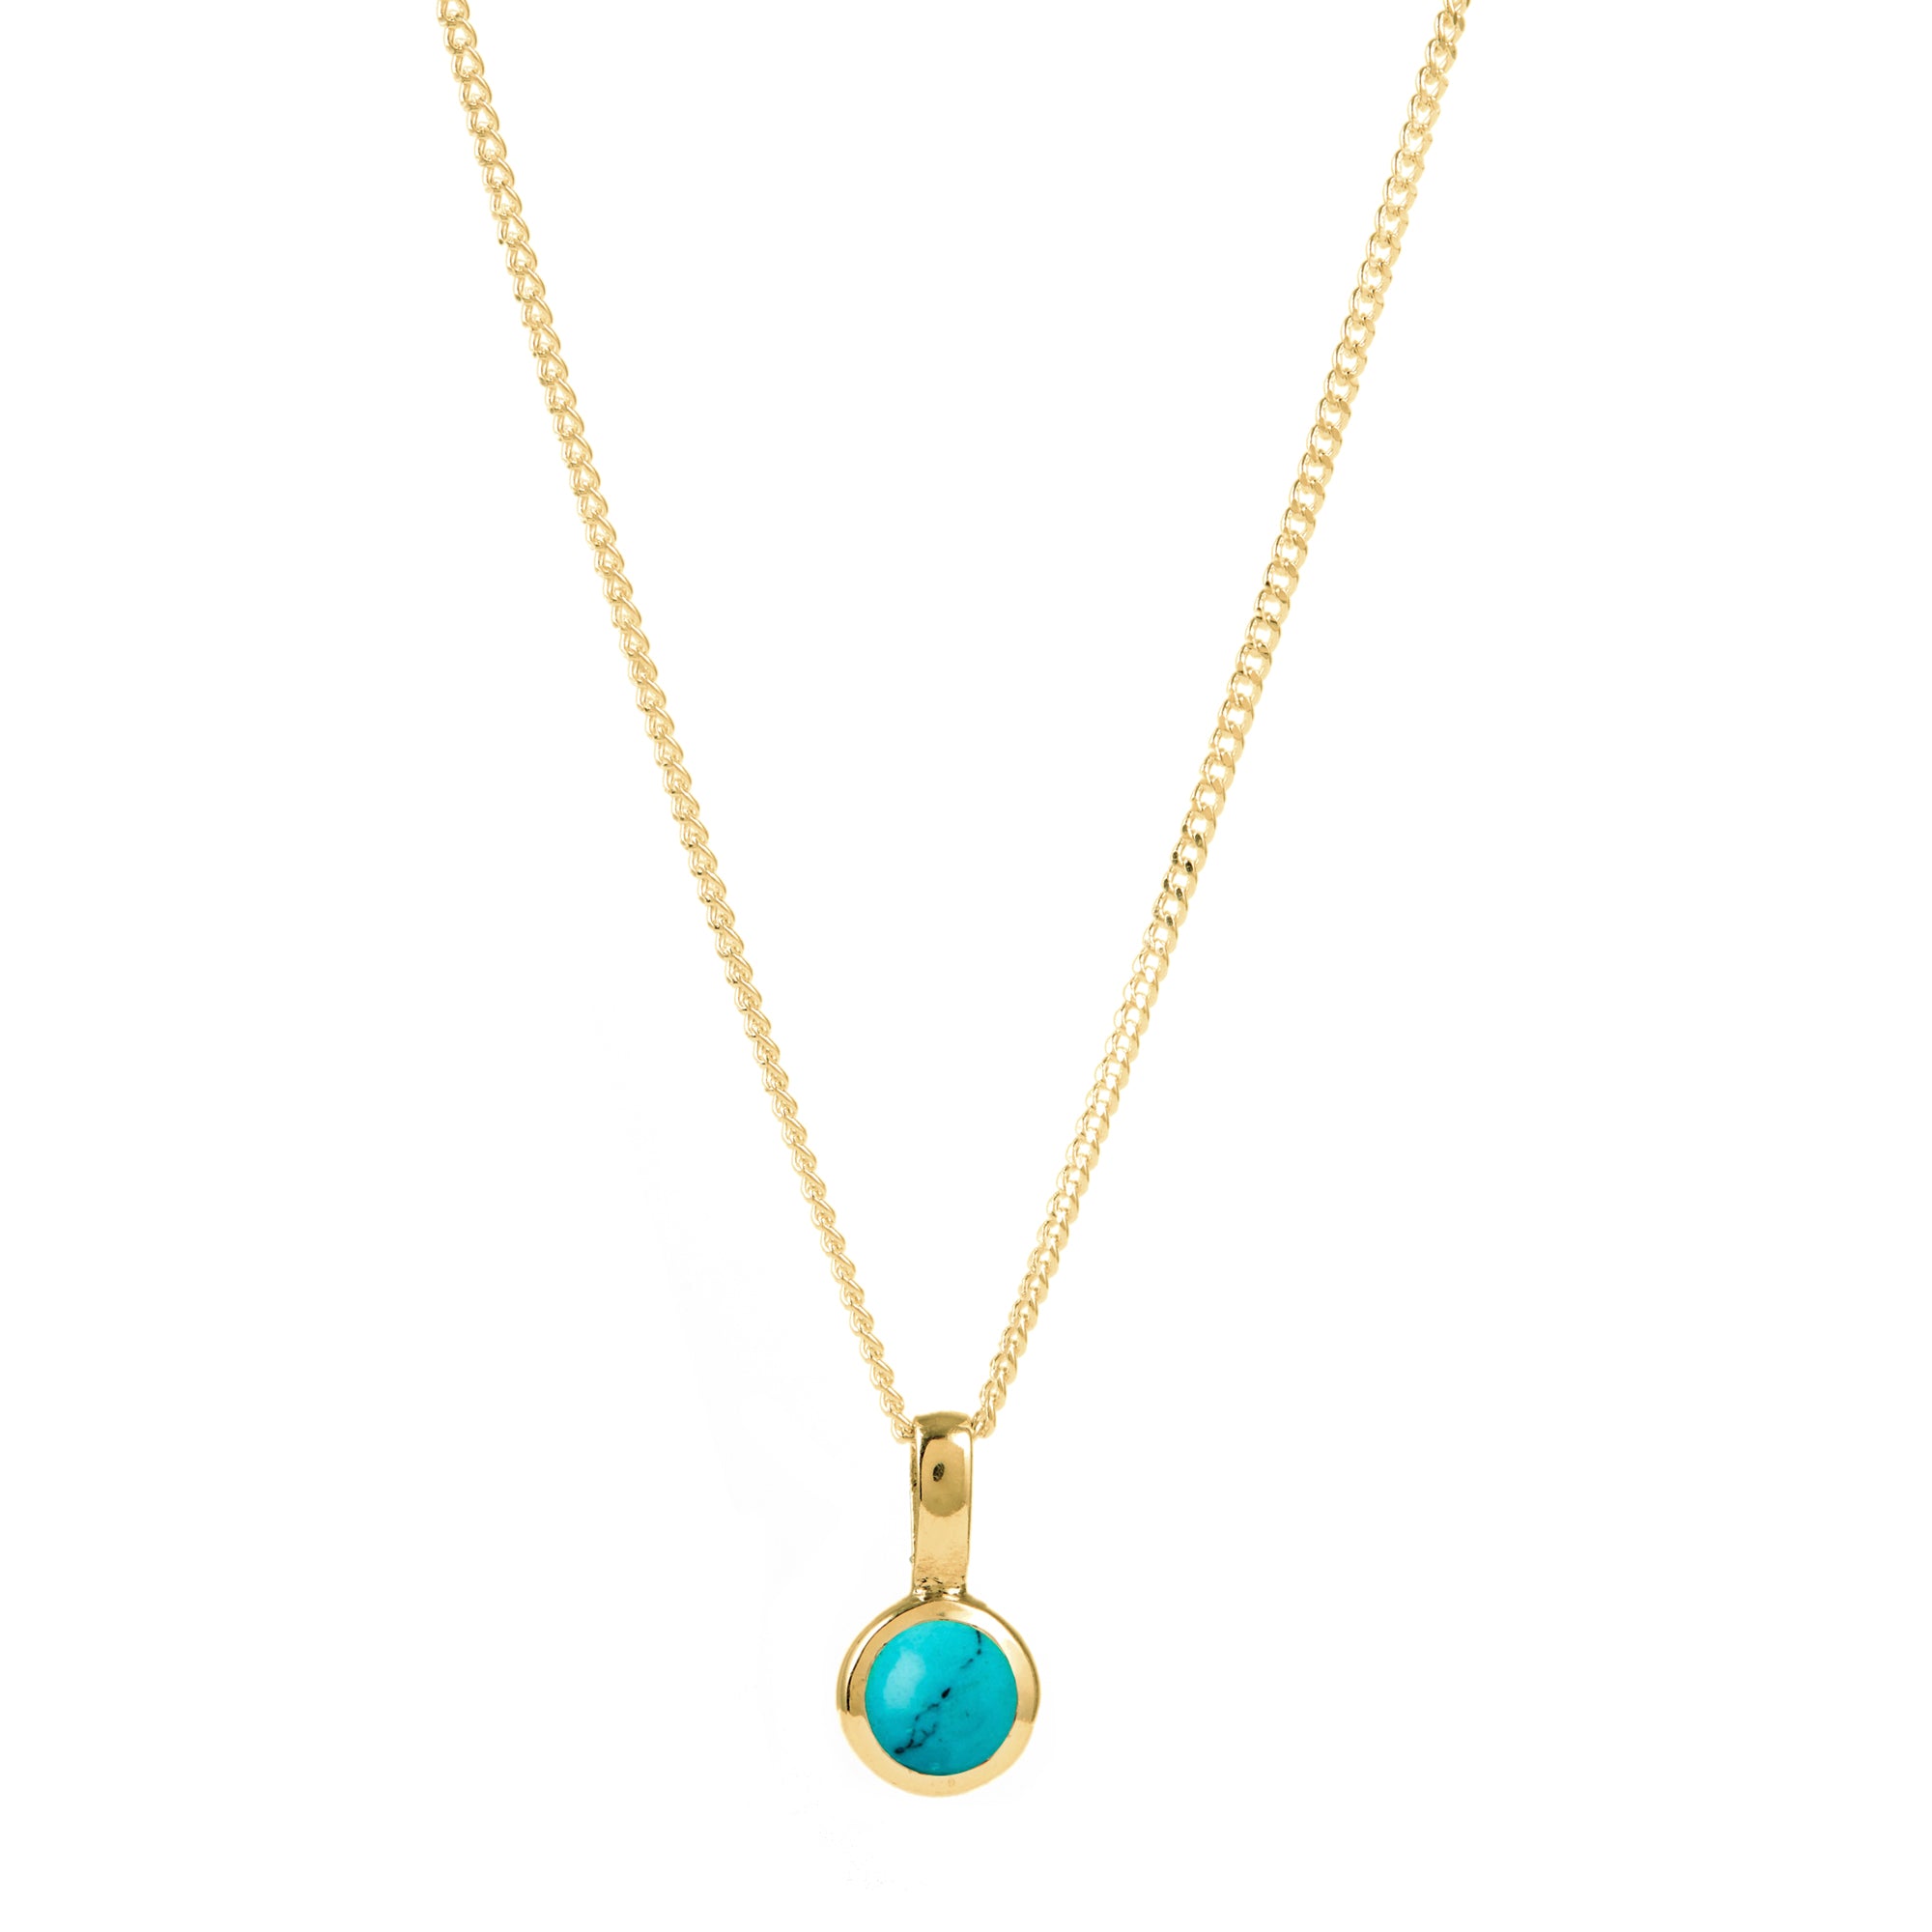 December Birthstone Charm Necklace - Turquoise